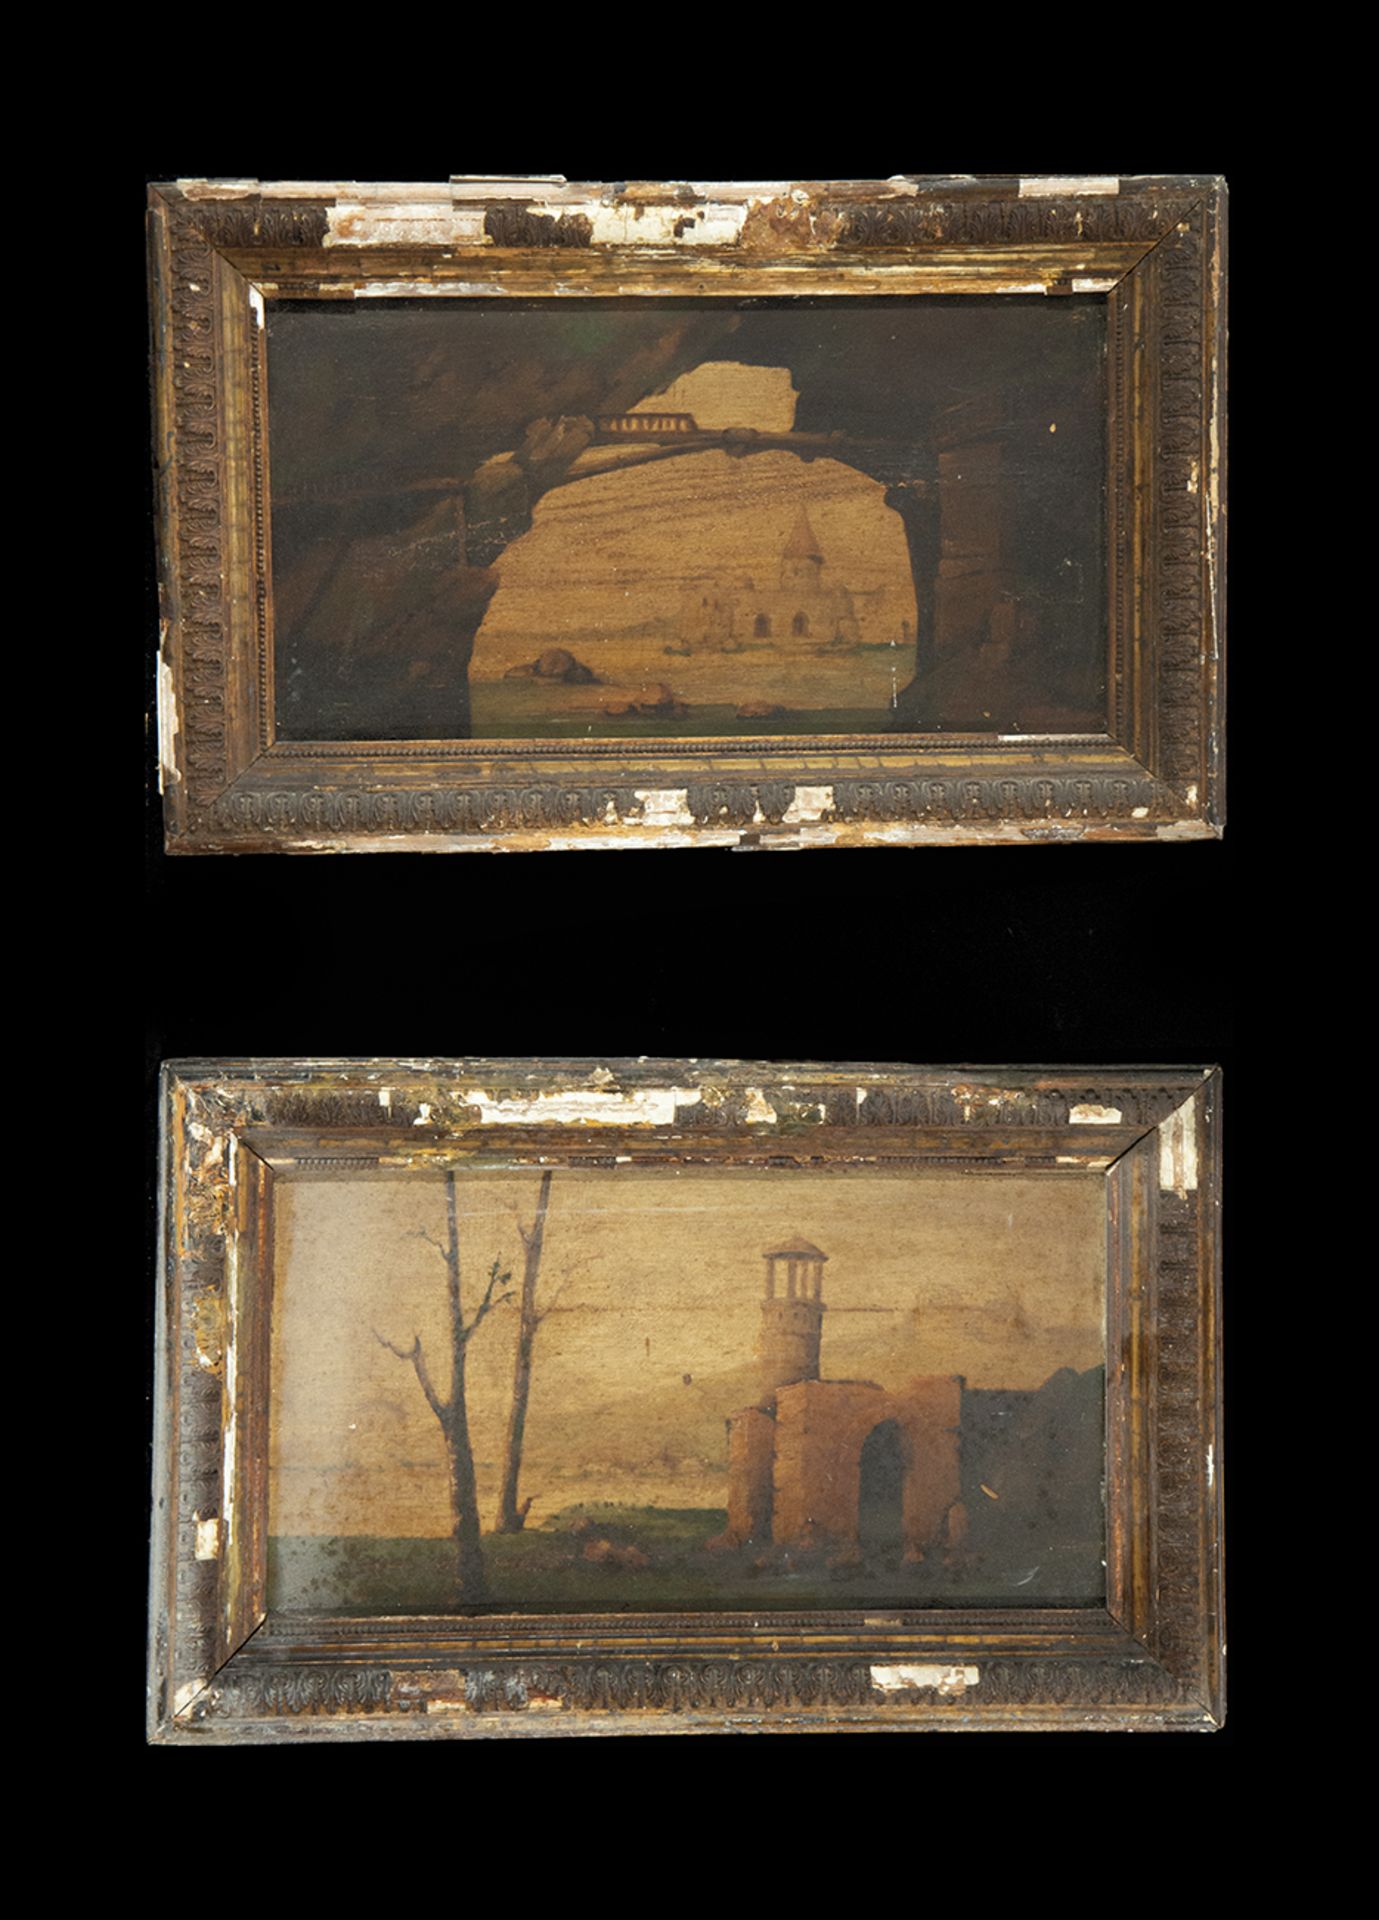 Pair of Landscapes with Whimsies, 19th century, Italy